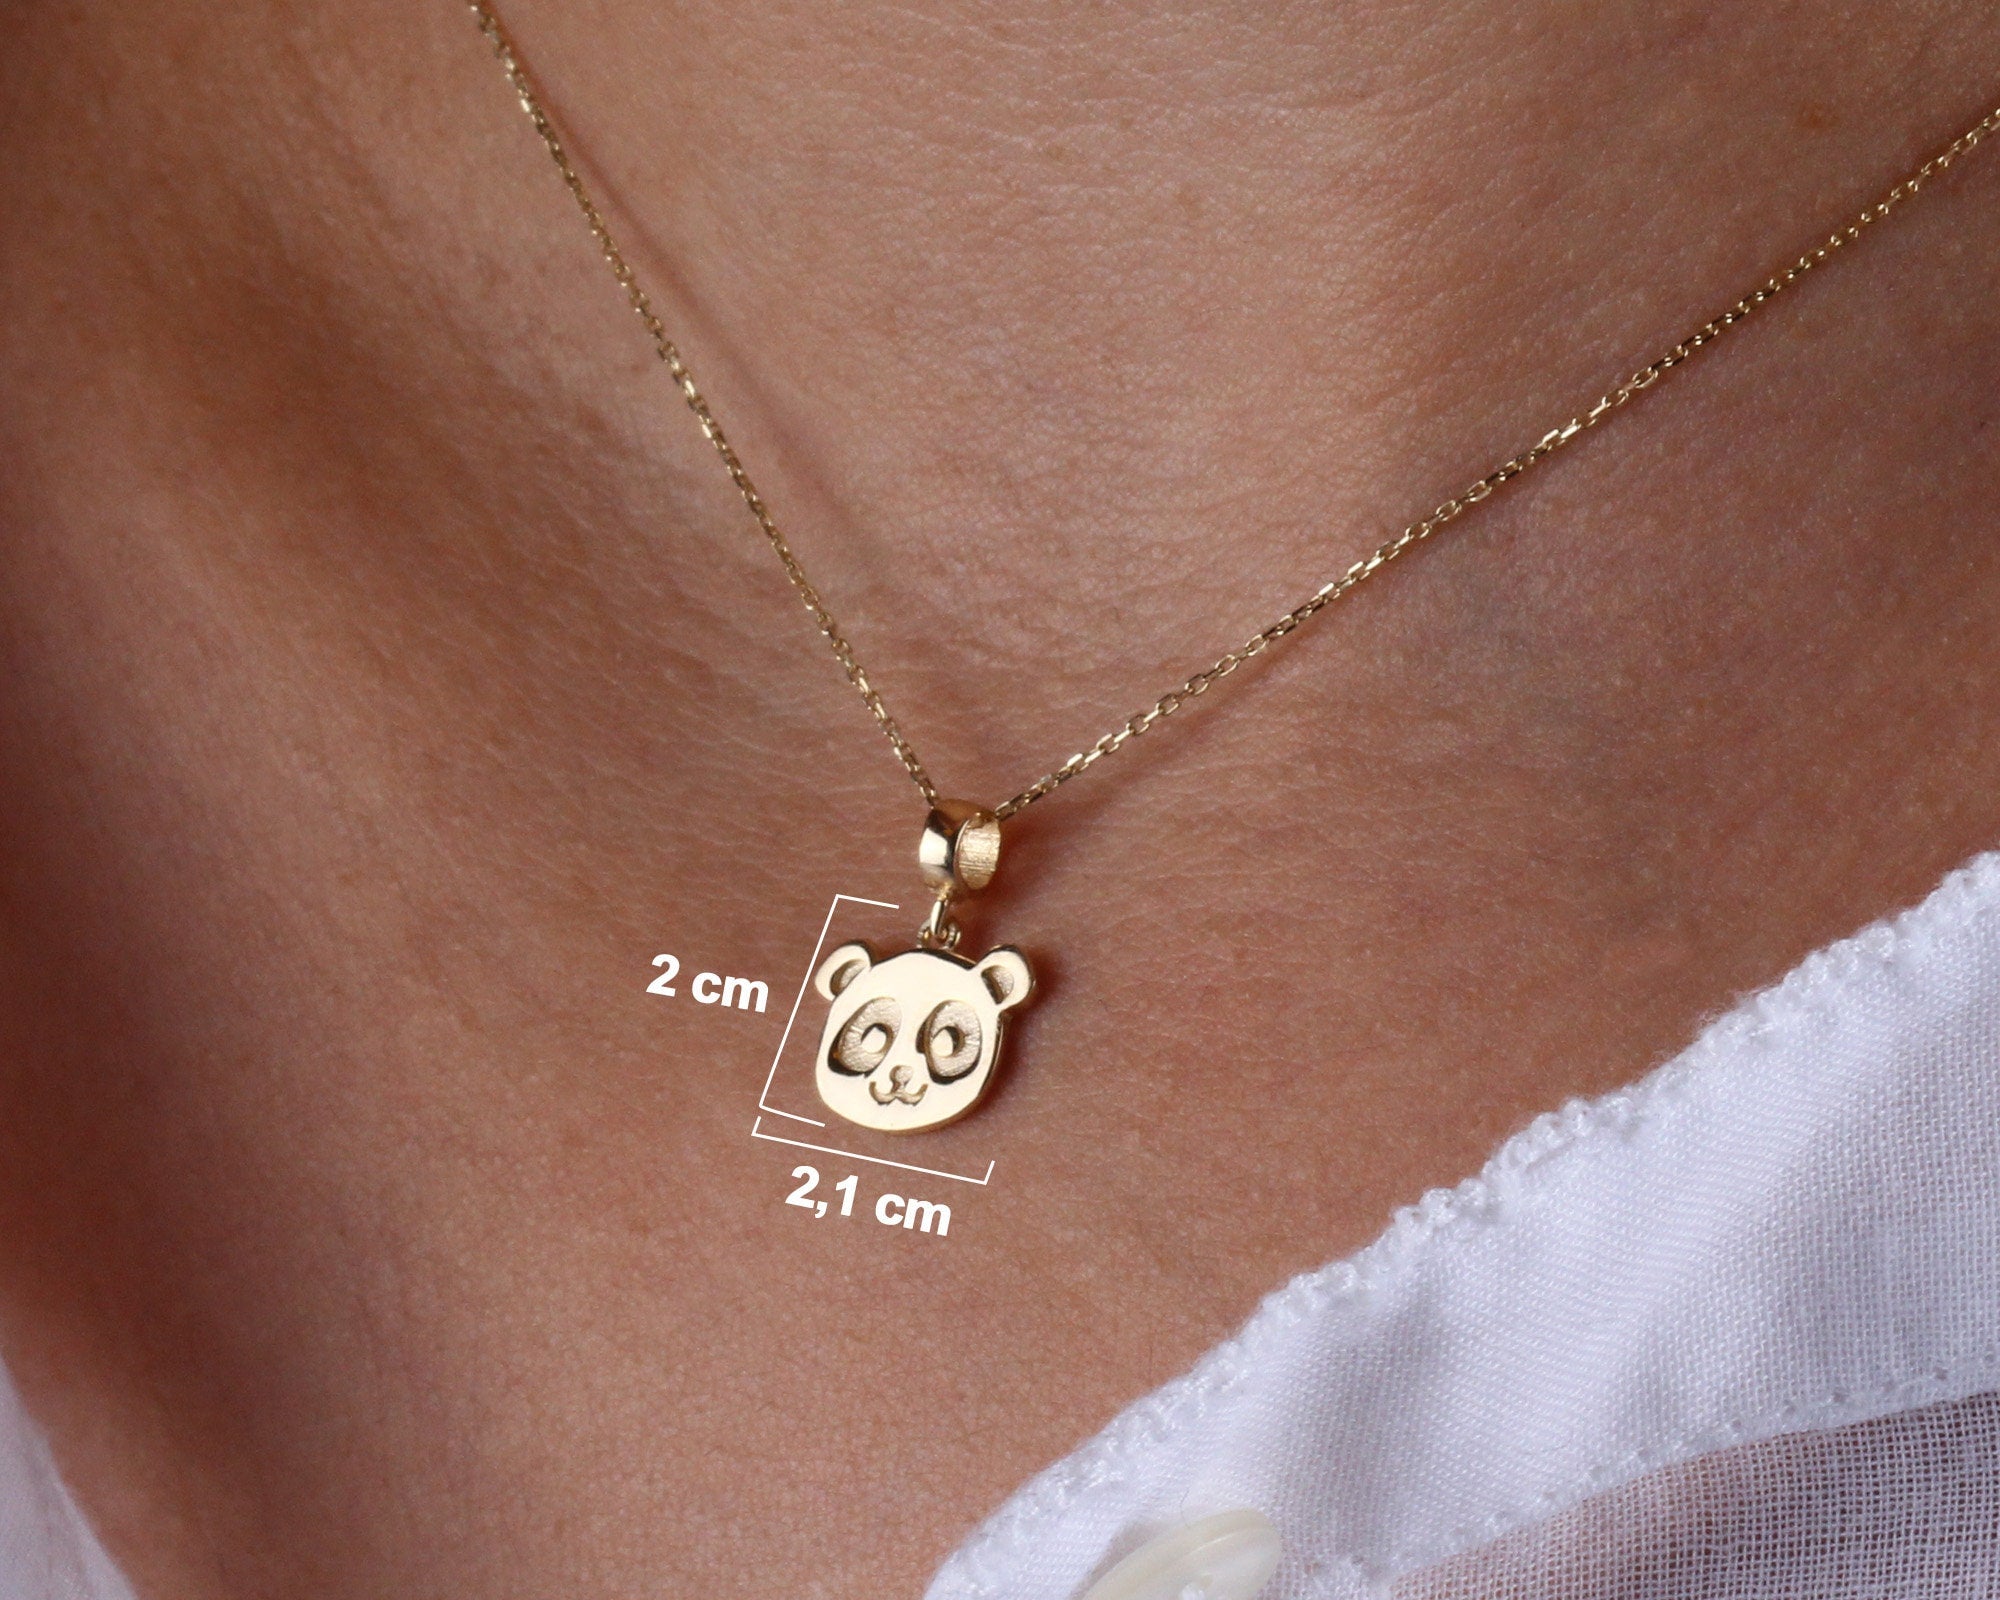 14K Gold Panda Necklace, Gold Panda Bear Pendant, Panda Face Design Choker, Animal Charm Jewelry, Unique Necklace, Luck Pendant Gift for Her